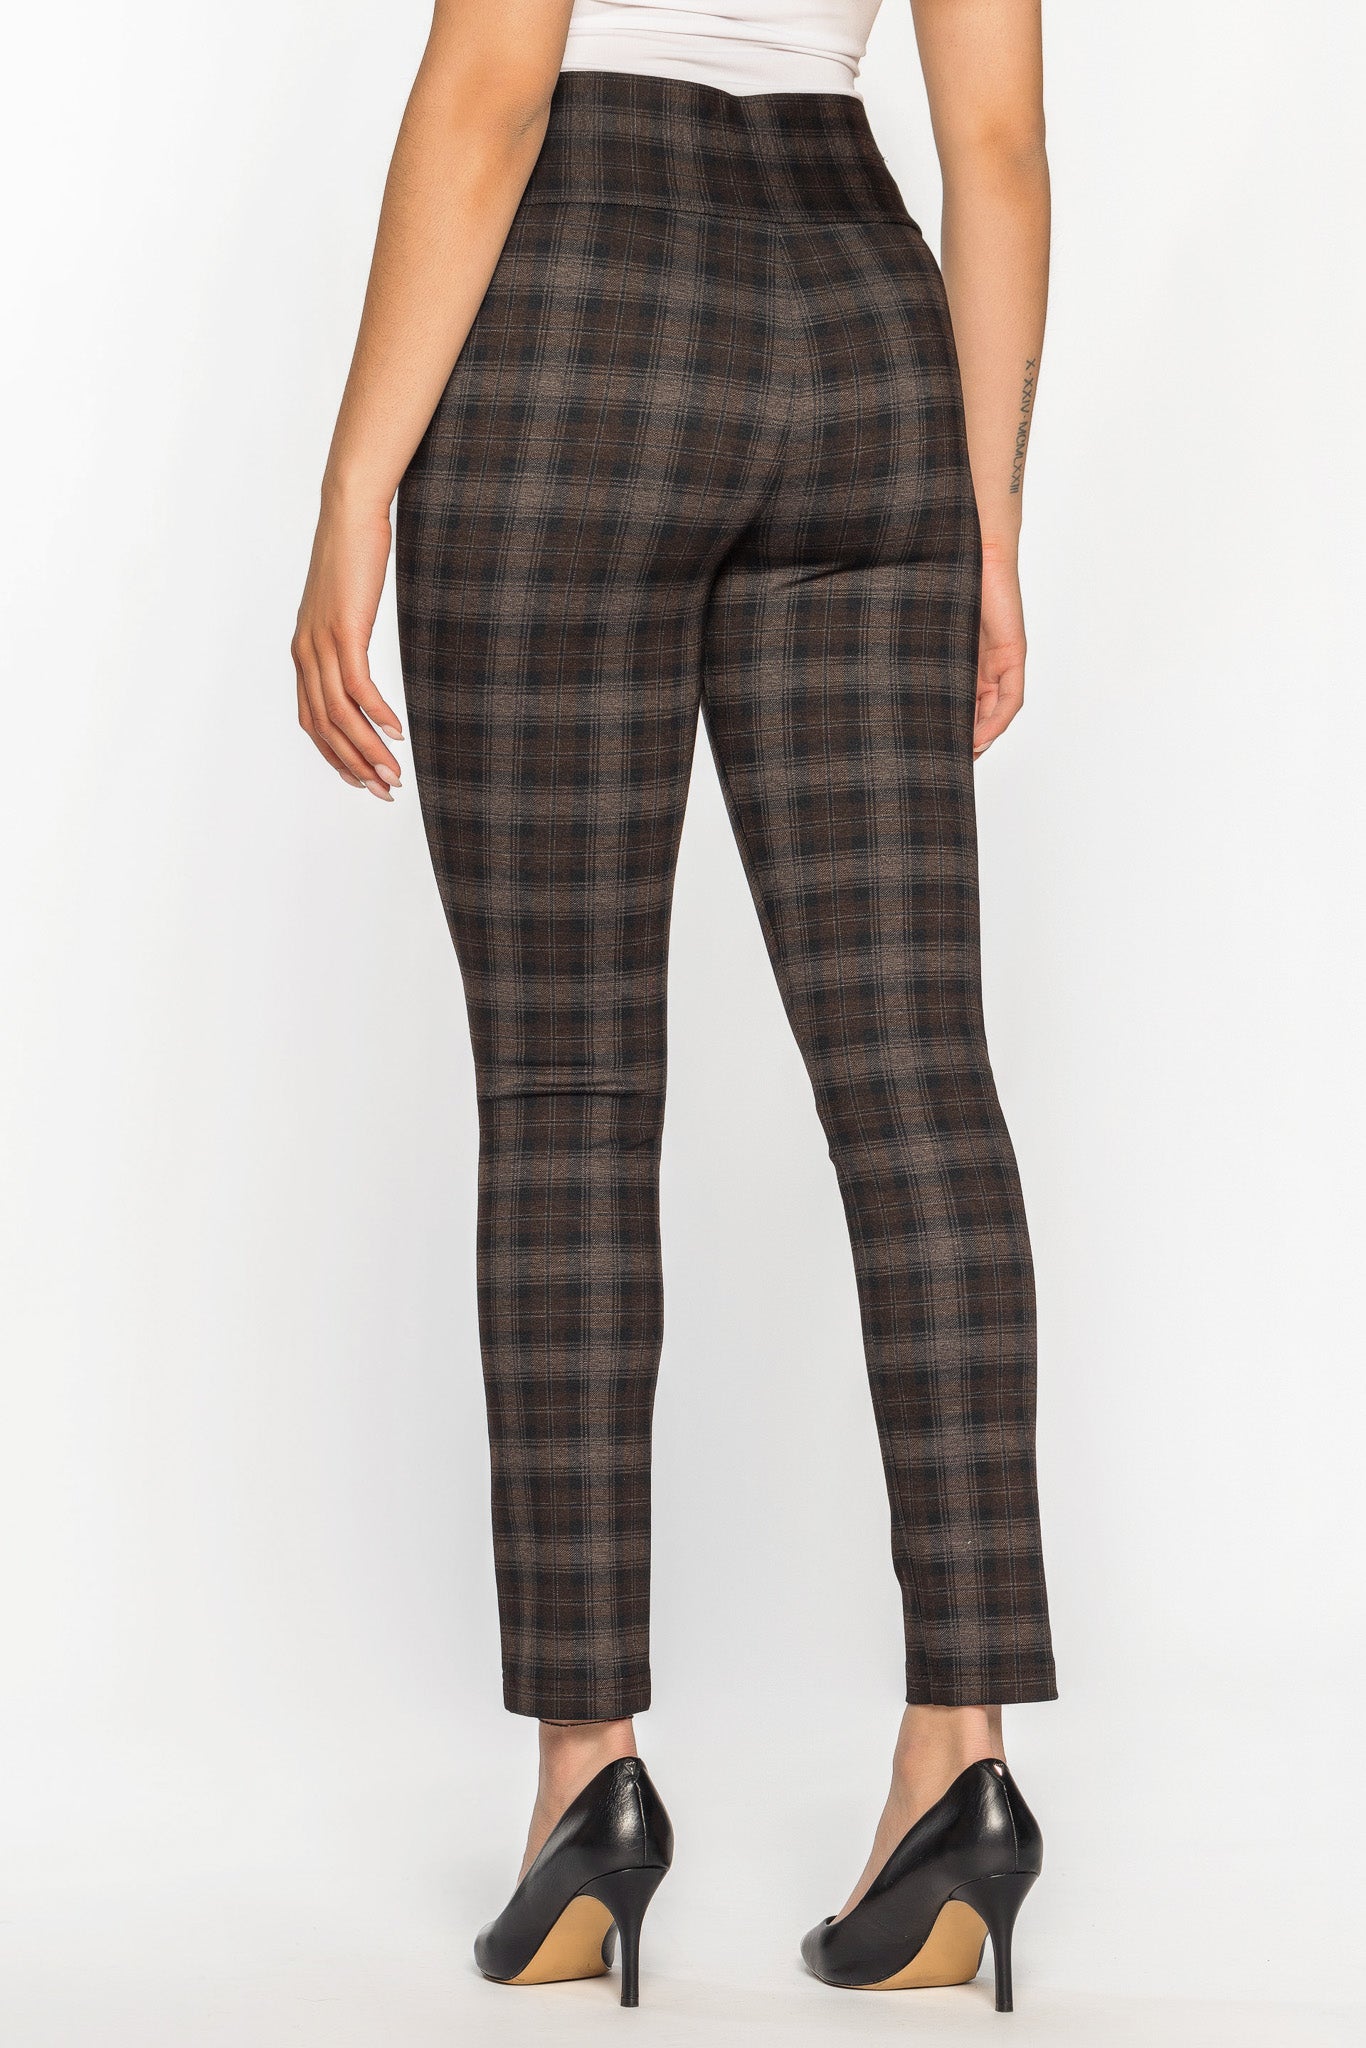 Constance Plaid Seriously Slimming Pant